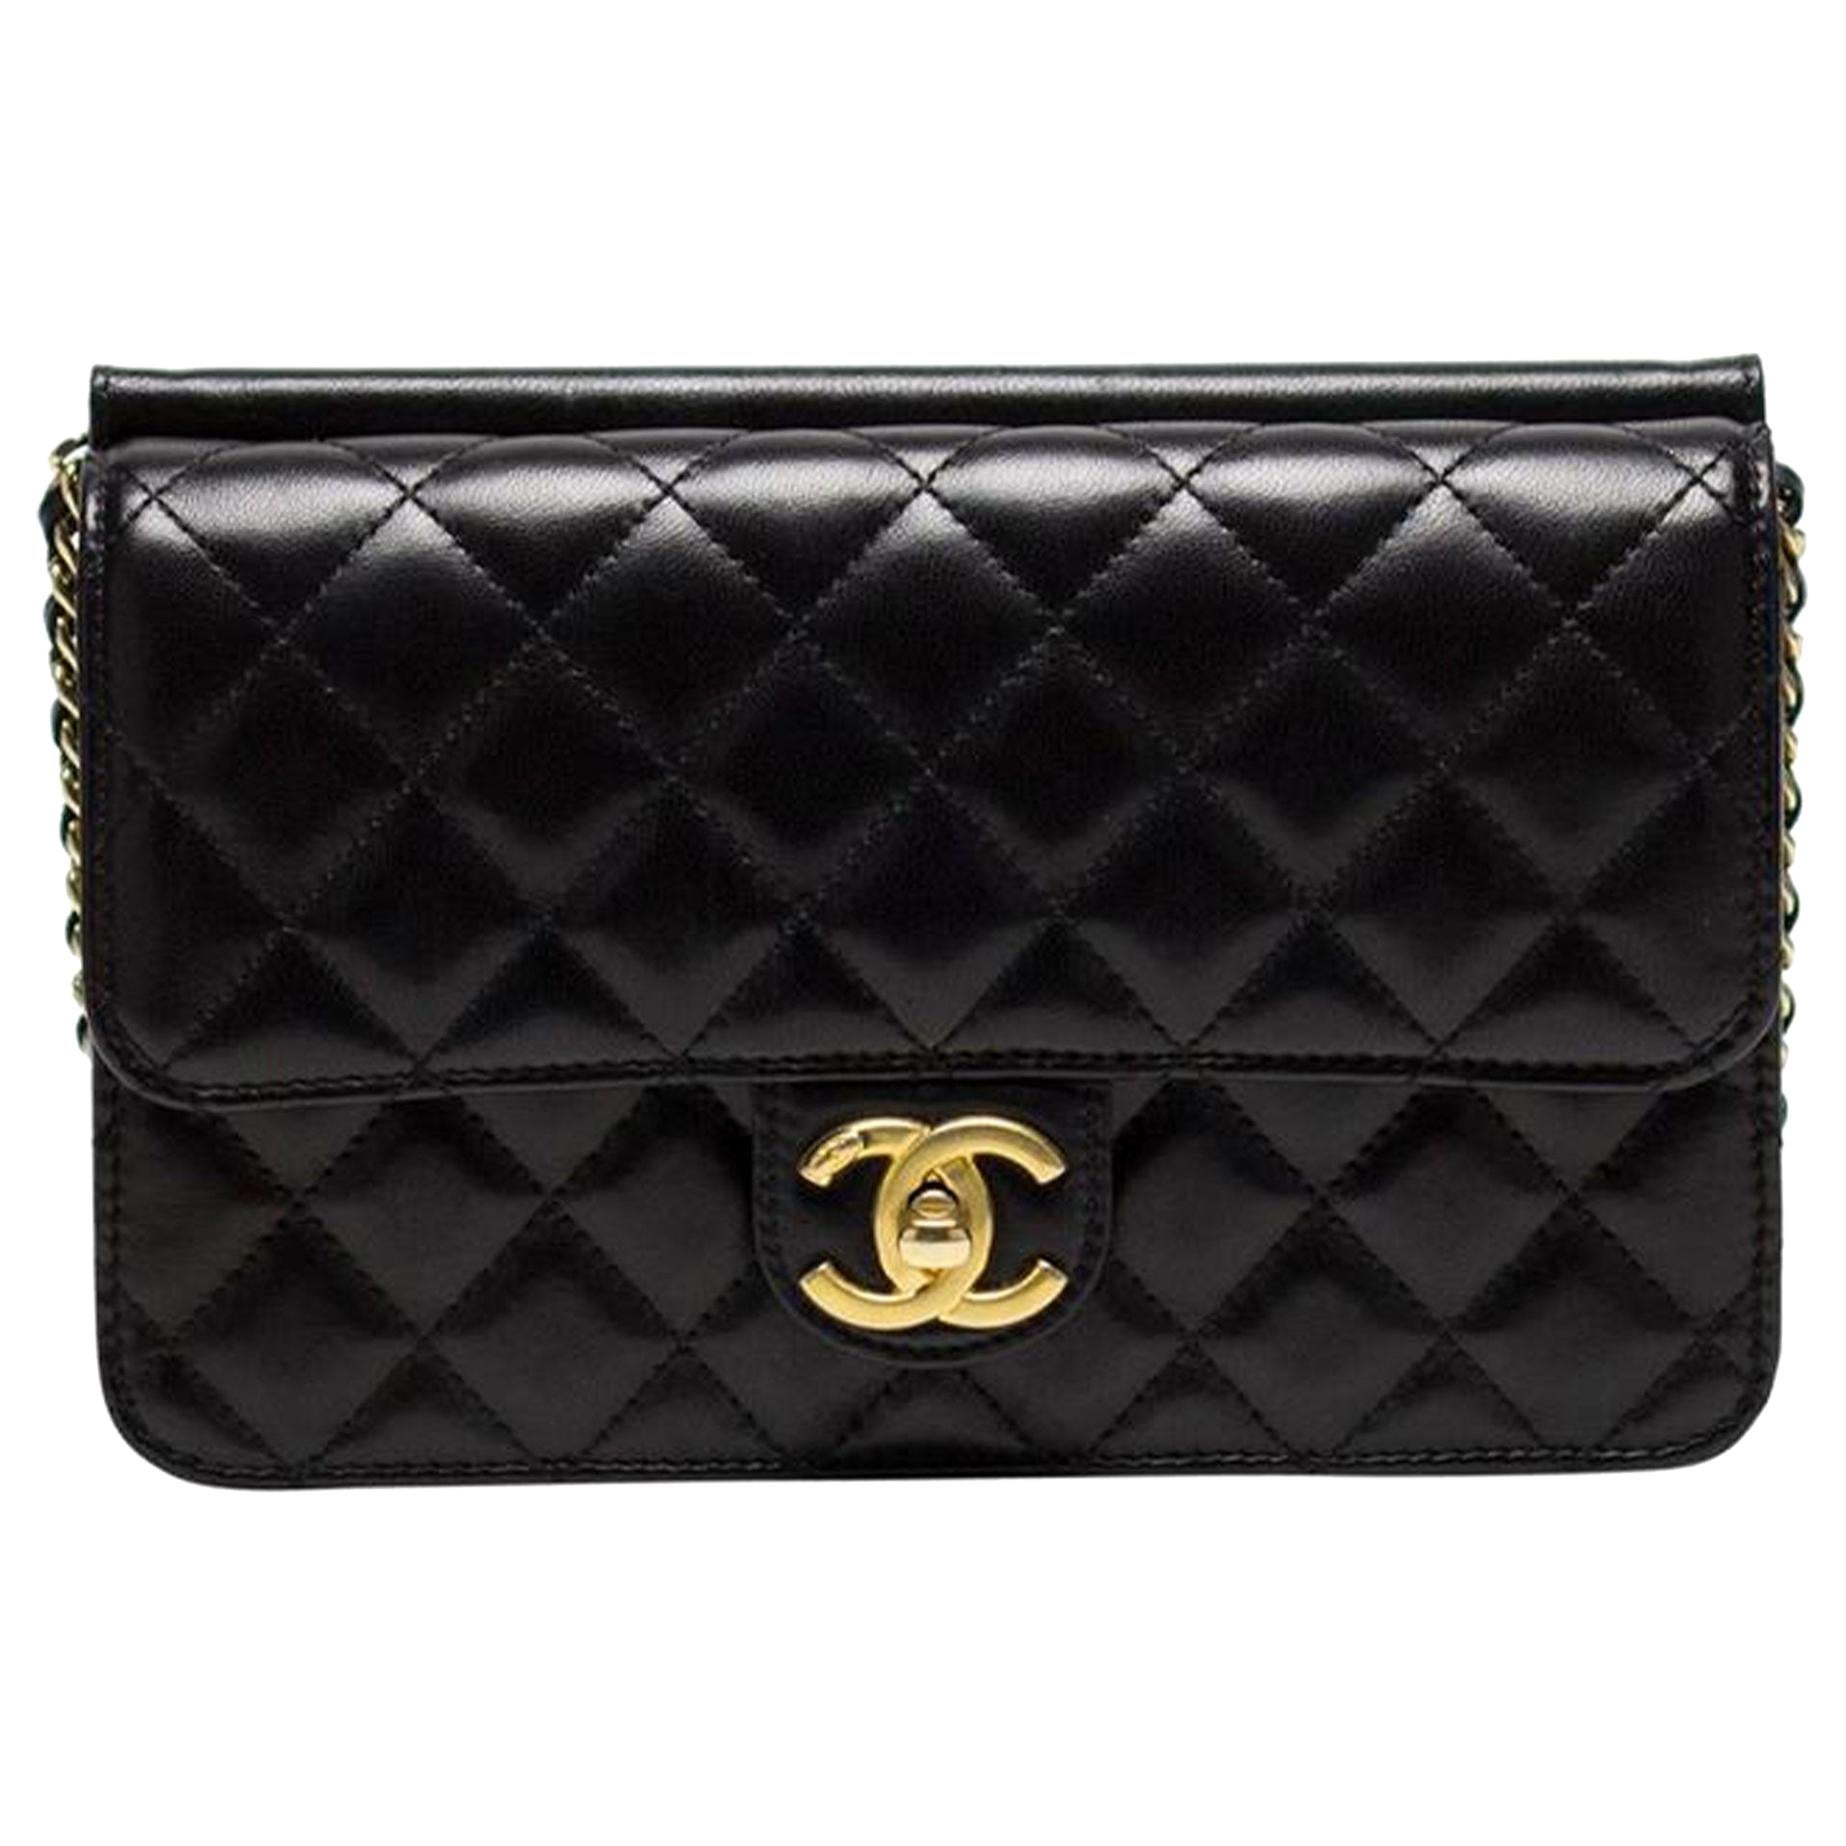 The Chanel Collection Of An Italian Fashionista Is Up For Sale Right Now